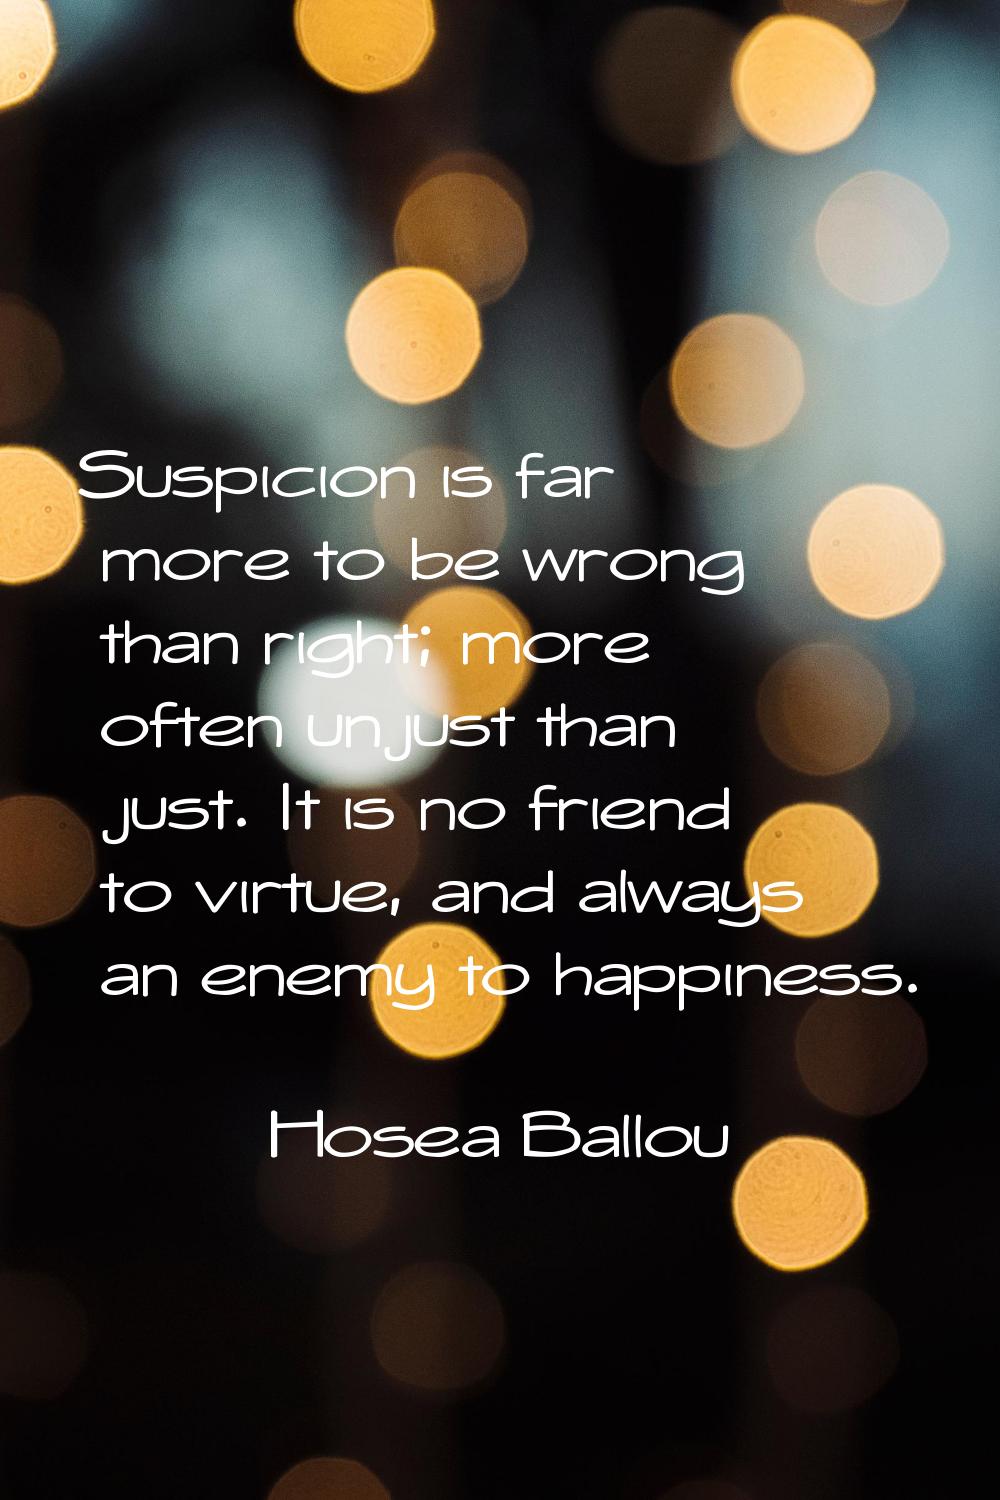 Suspicion is far more to be wrong than right; more often unjust than just. It is no friend to virtu